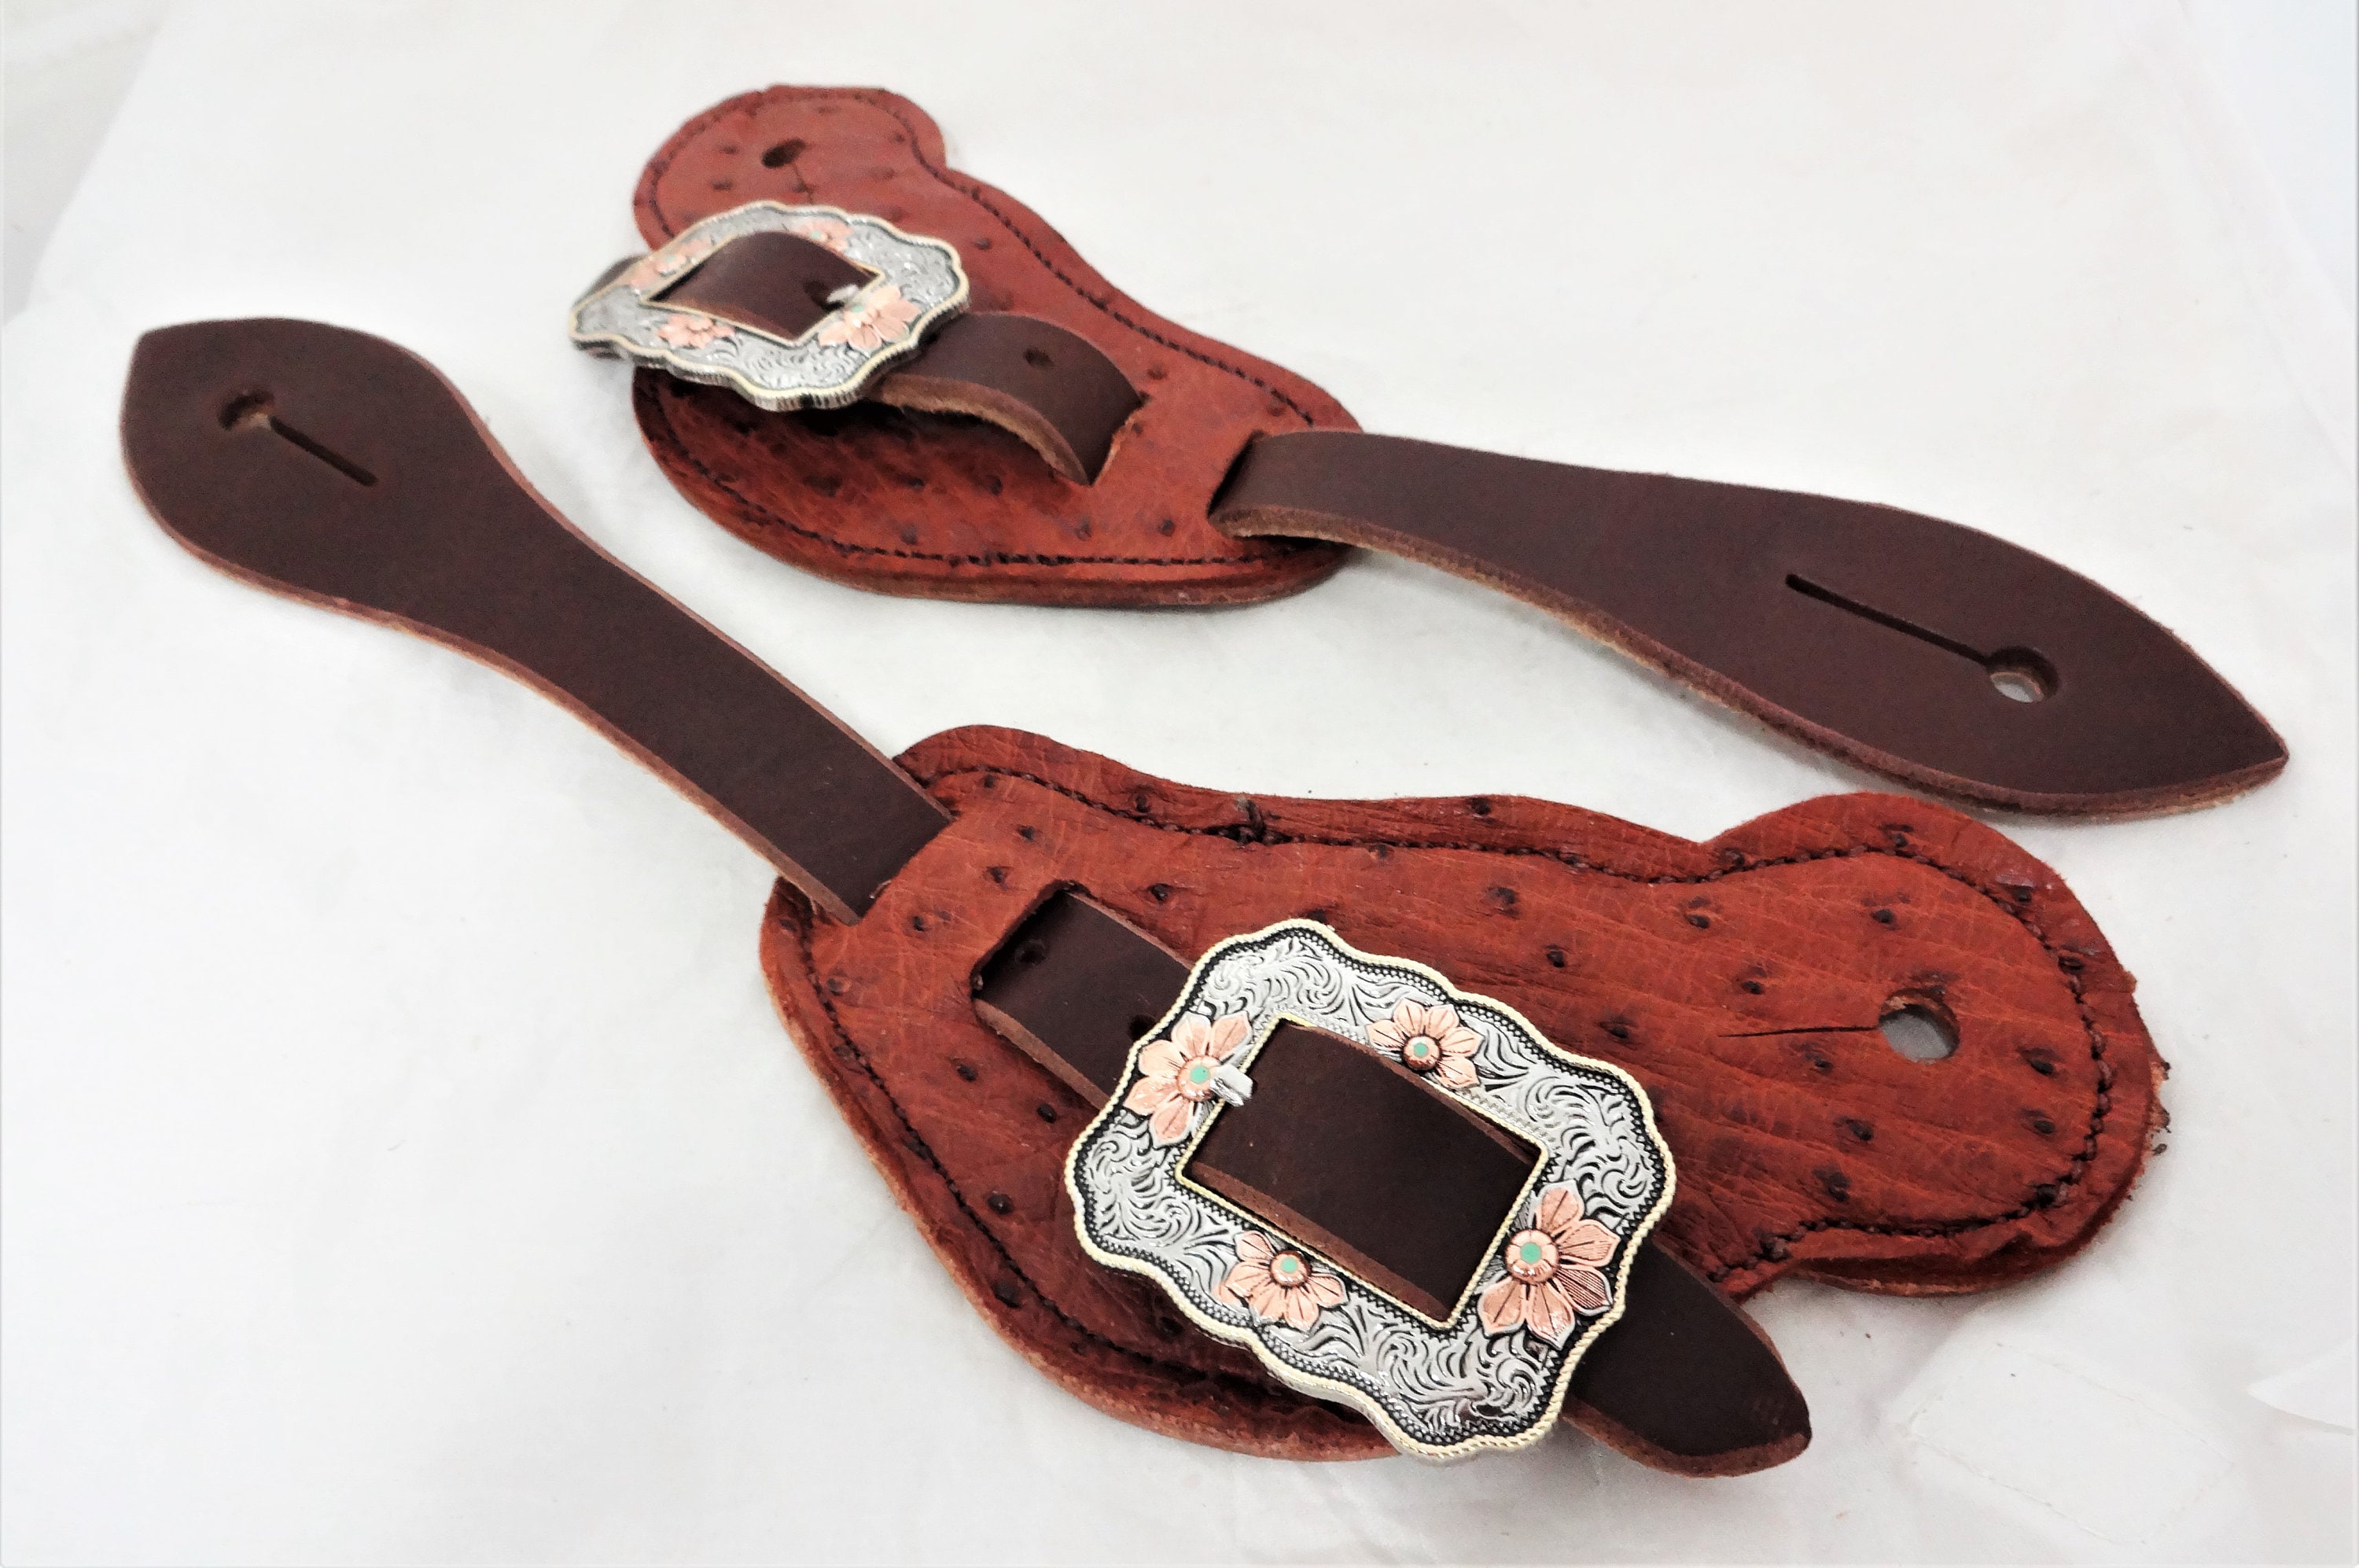 Rust Ostrich Full Quill Brown Western Spur Straps Pair Harness Leather Buckaroo Cowboy West Coast Tack Horse Fngraved Floral Buckles Adult